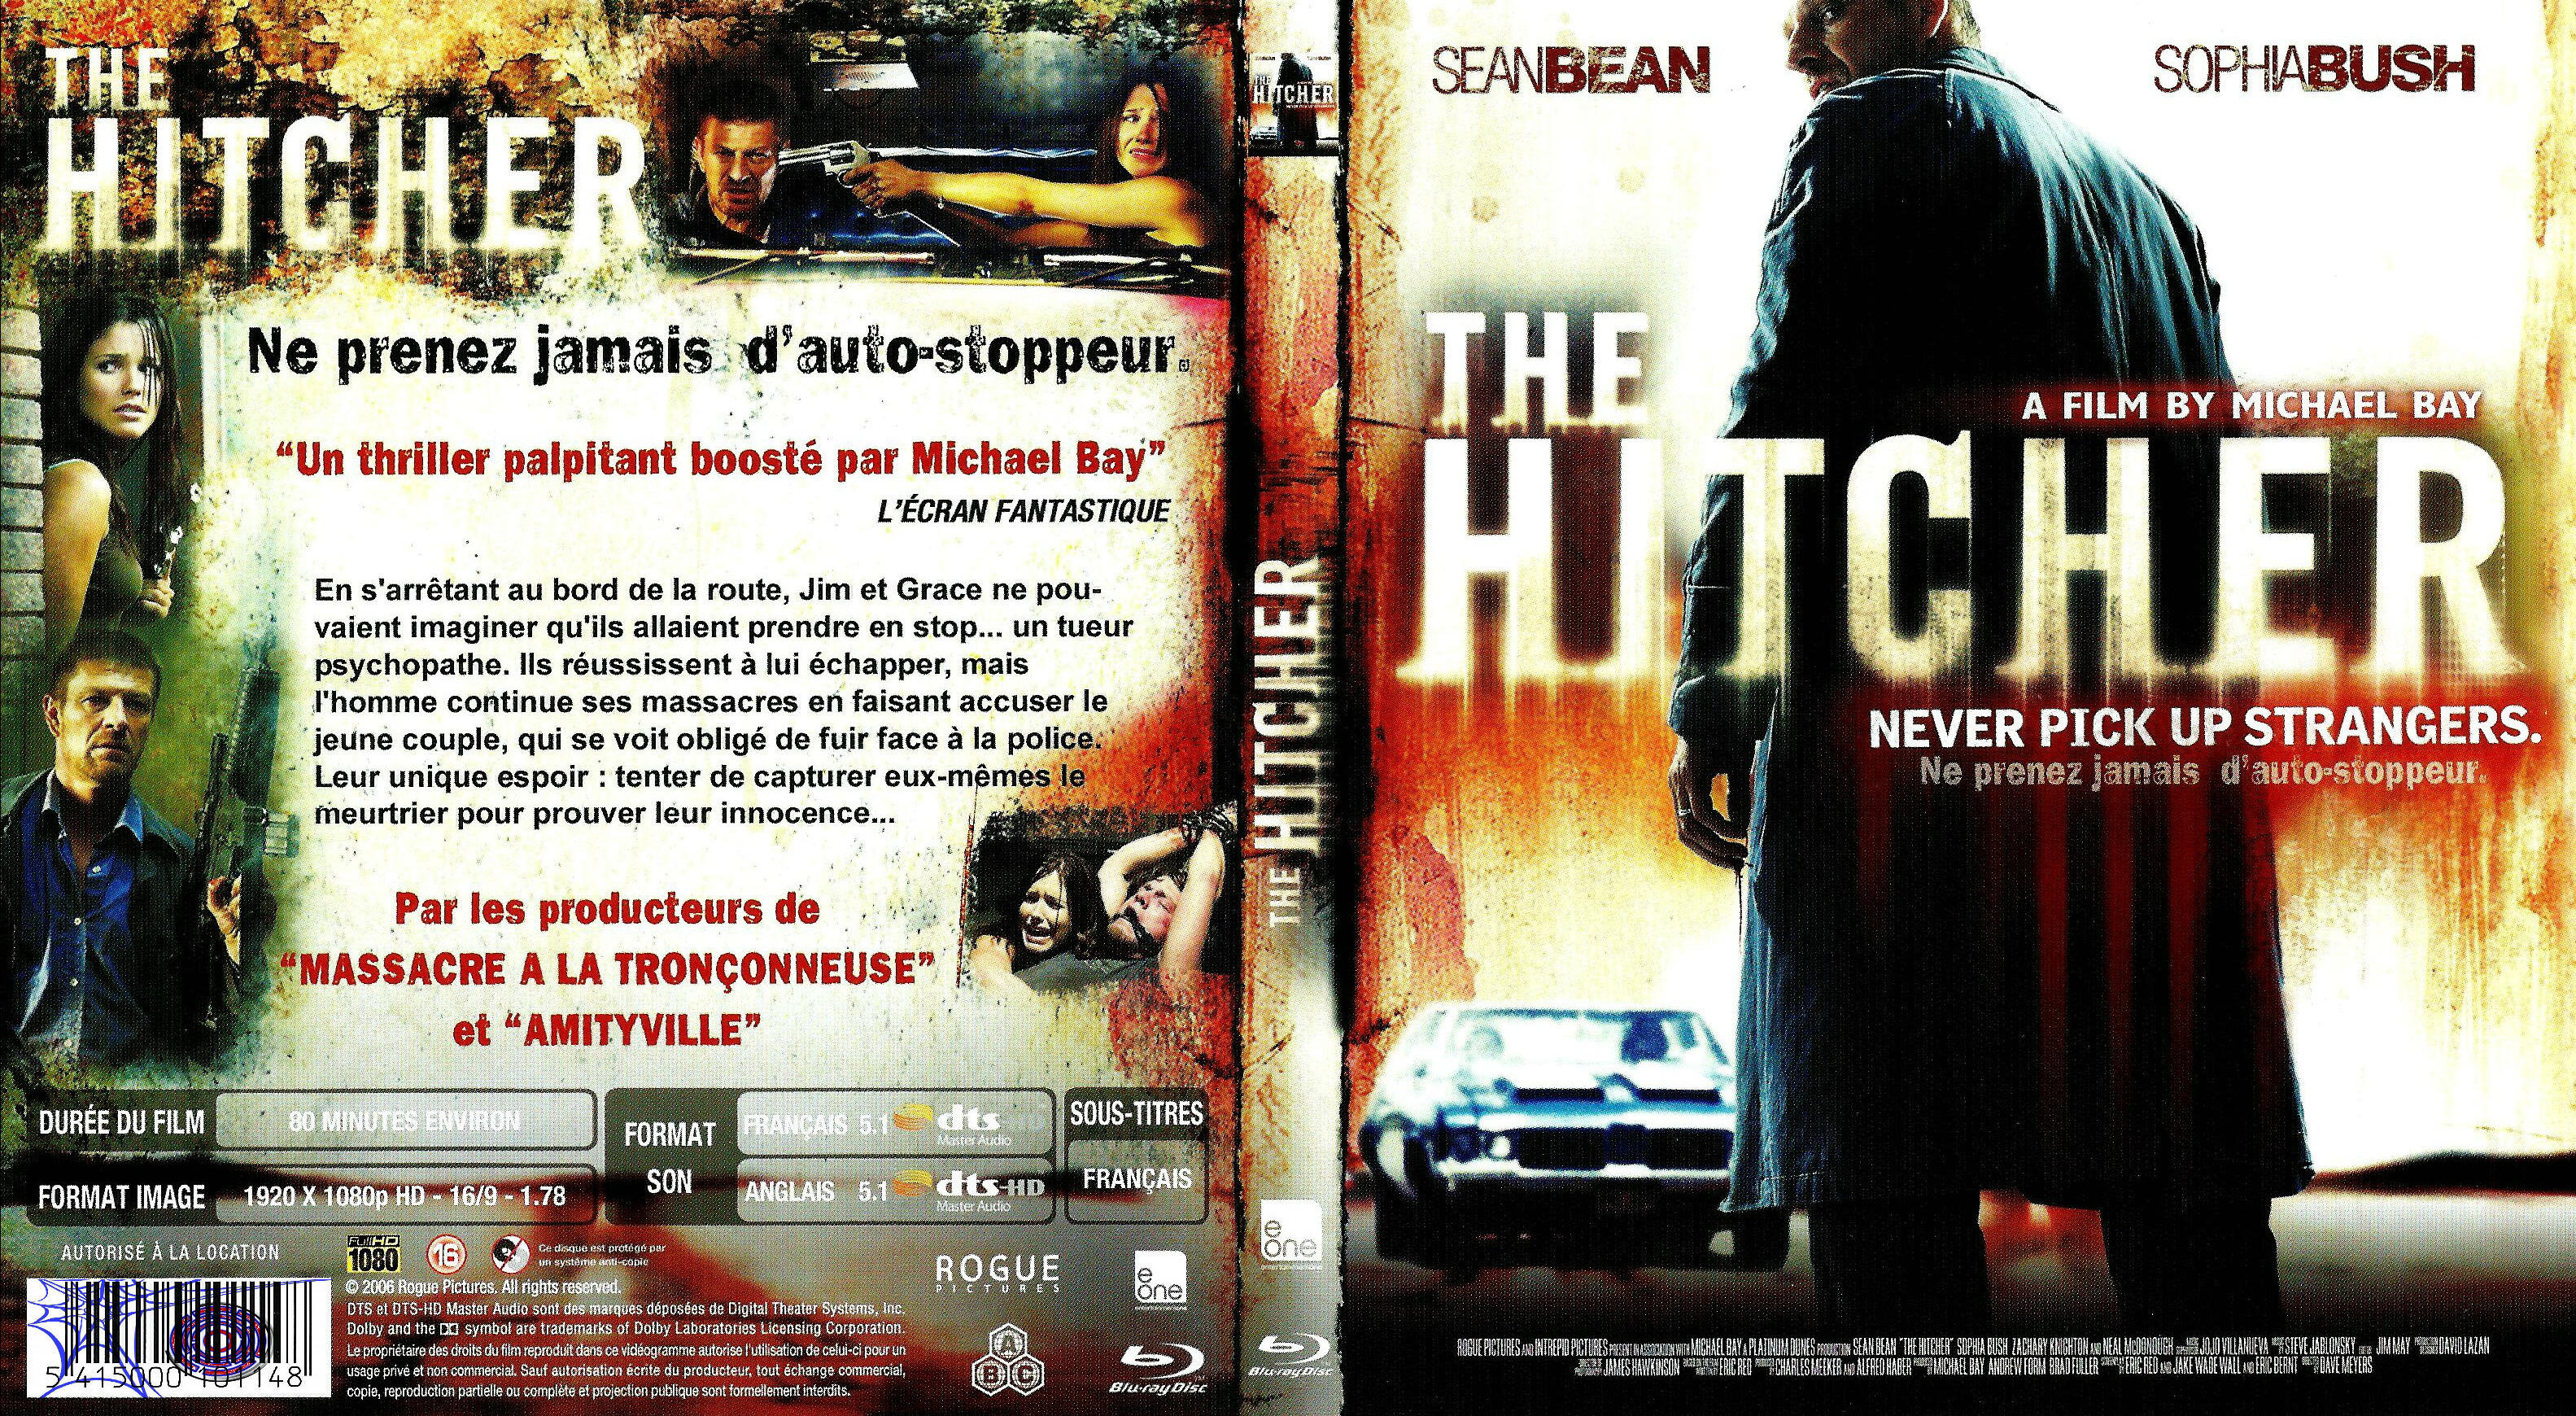 Jaquette DVD Hitcher (2007) (BLU-RAY)